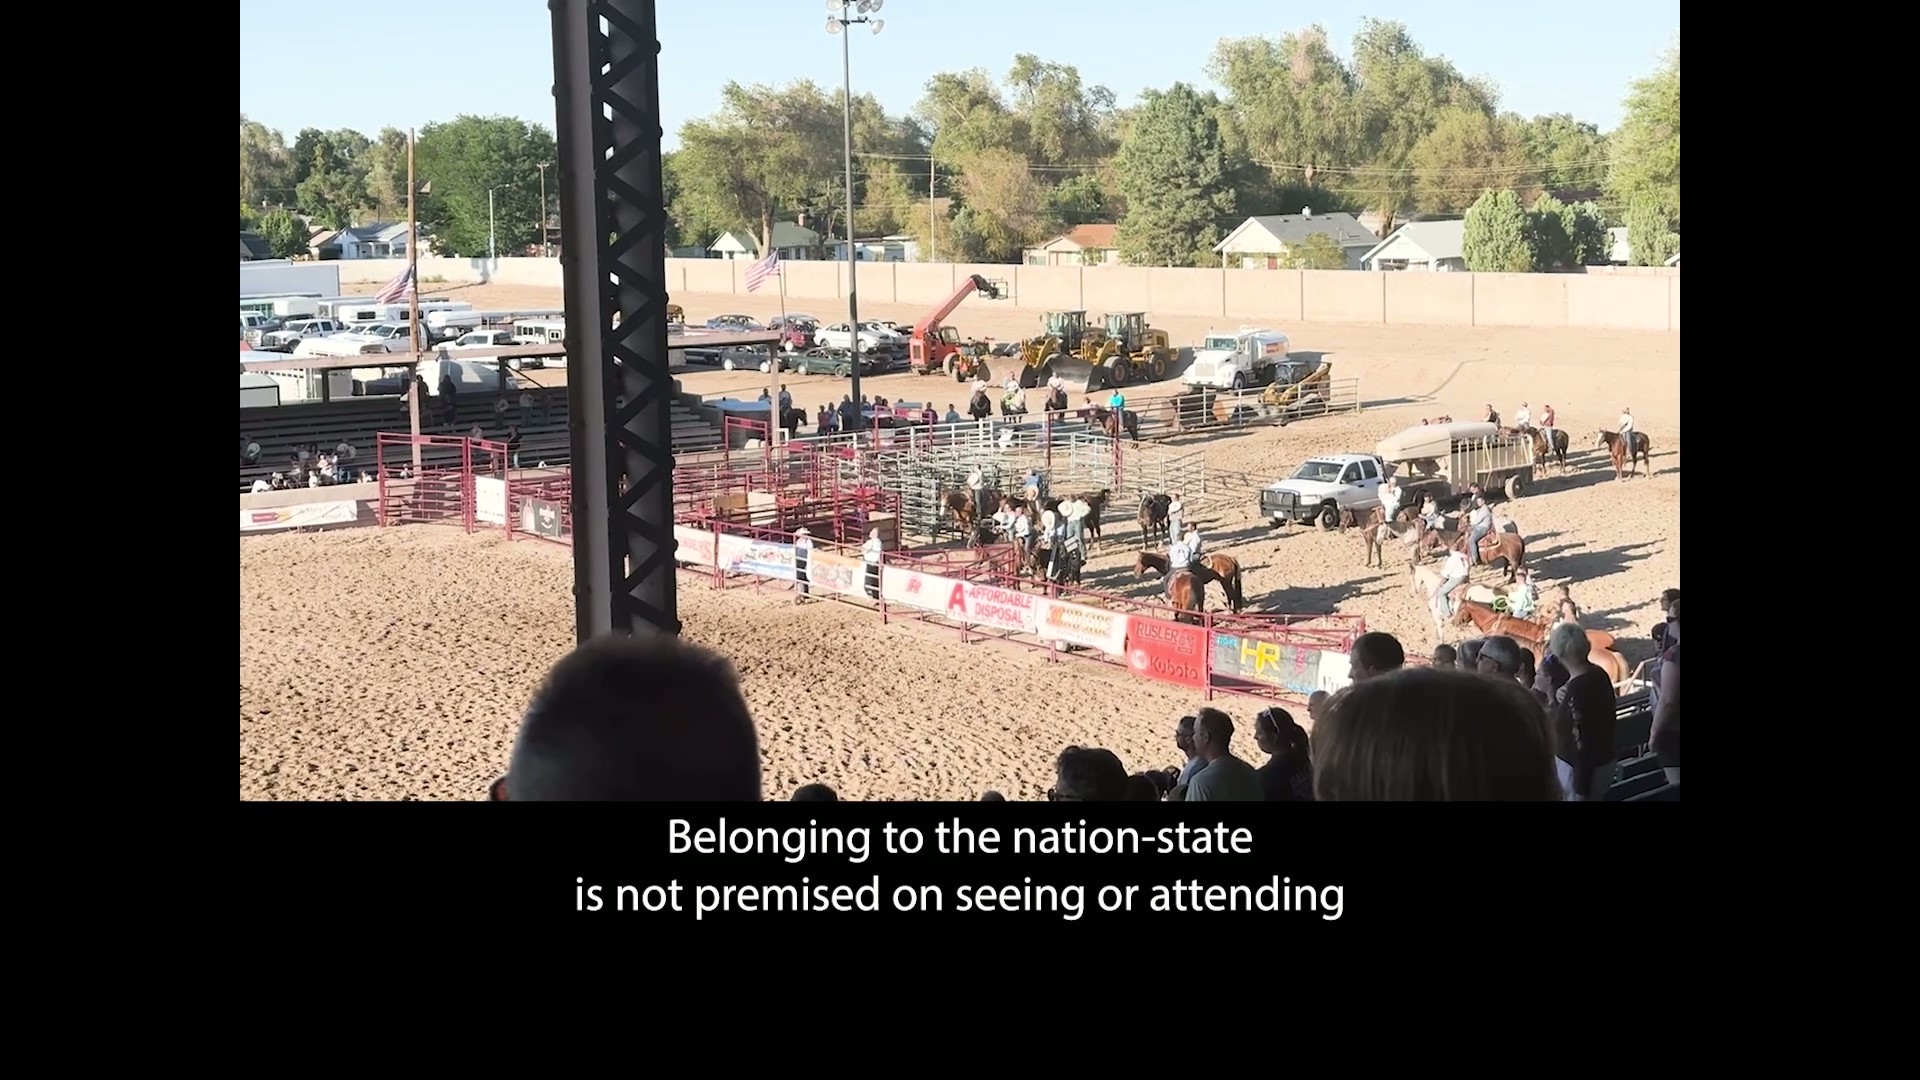 A still from the film An All-Around Feel Good by Jordan Lord. Prominent black borders are on the left, right and bottom edges of the image.  Framed by the black borders is an image of the Colorado State Fair, taken from the bleachers on a bright sunny day. The camera is facing outside the main stage, where there are horses and riders in a pen, numerous parked cars and a tractor, and several U.S. flags, and audience members both near the camera and across the stage. On the bottom is the caption "Belonging to the nation-state is not premised on seeing or attending".